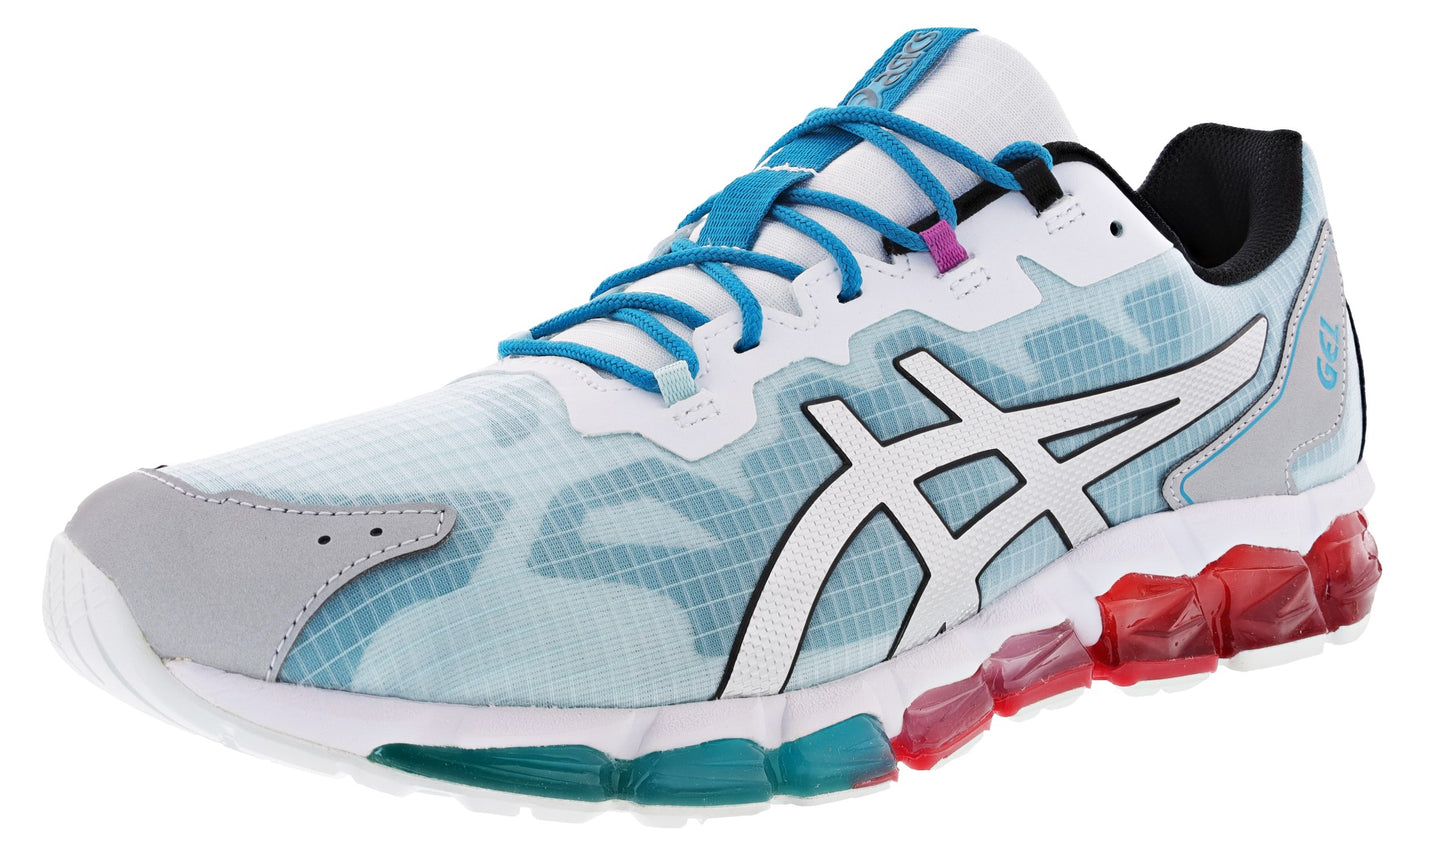 Lateral of Classic Red/Teal Blue Asics Gel Quantum 360 6 Men's Lightweight Running Shoes